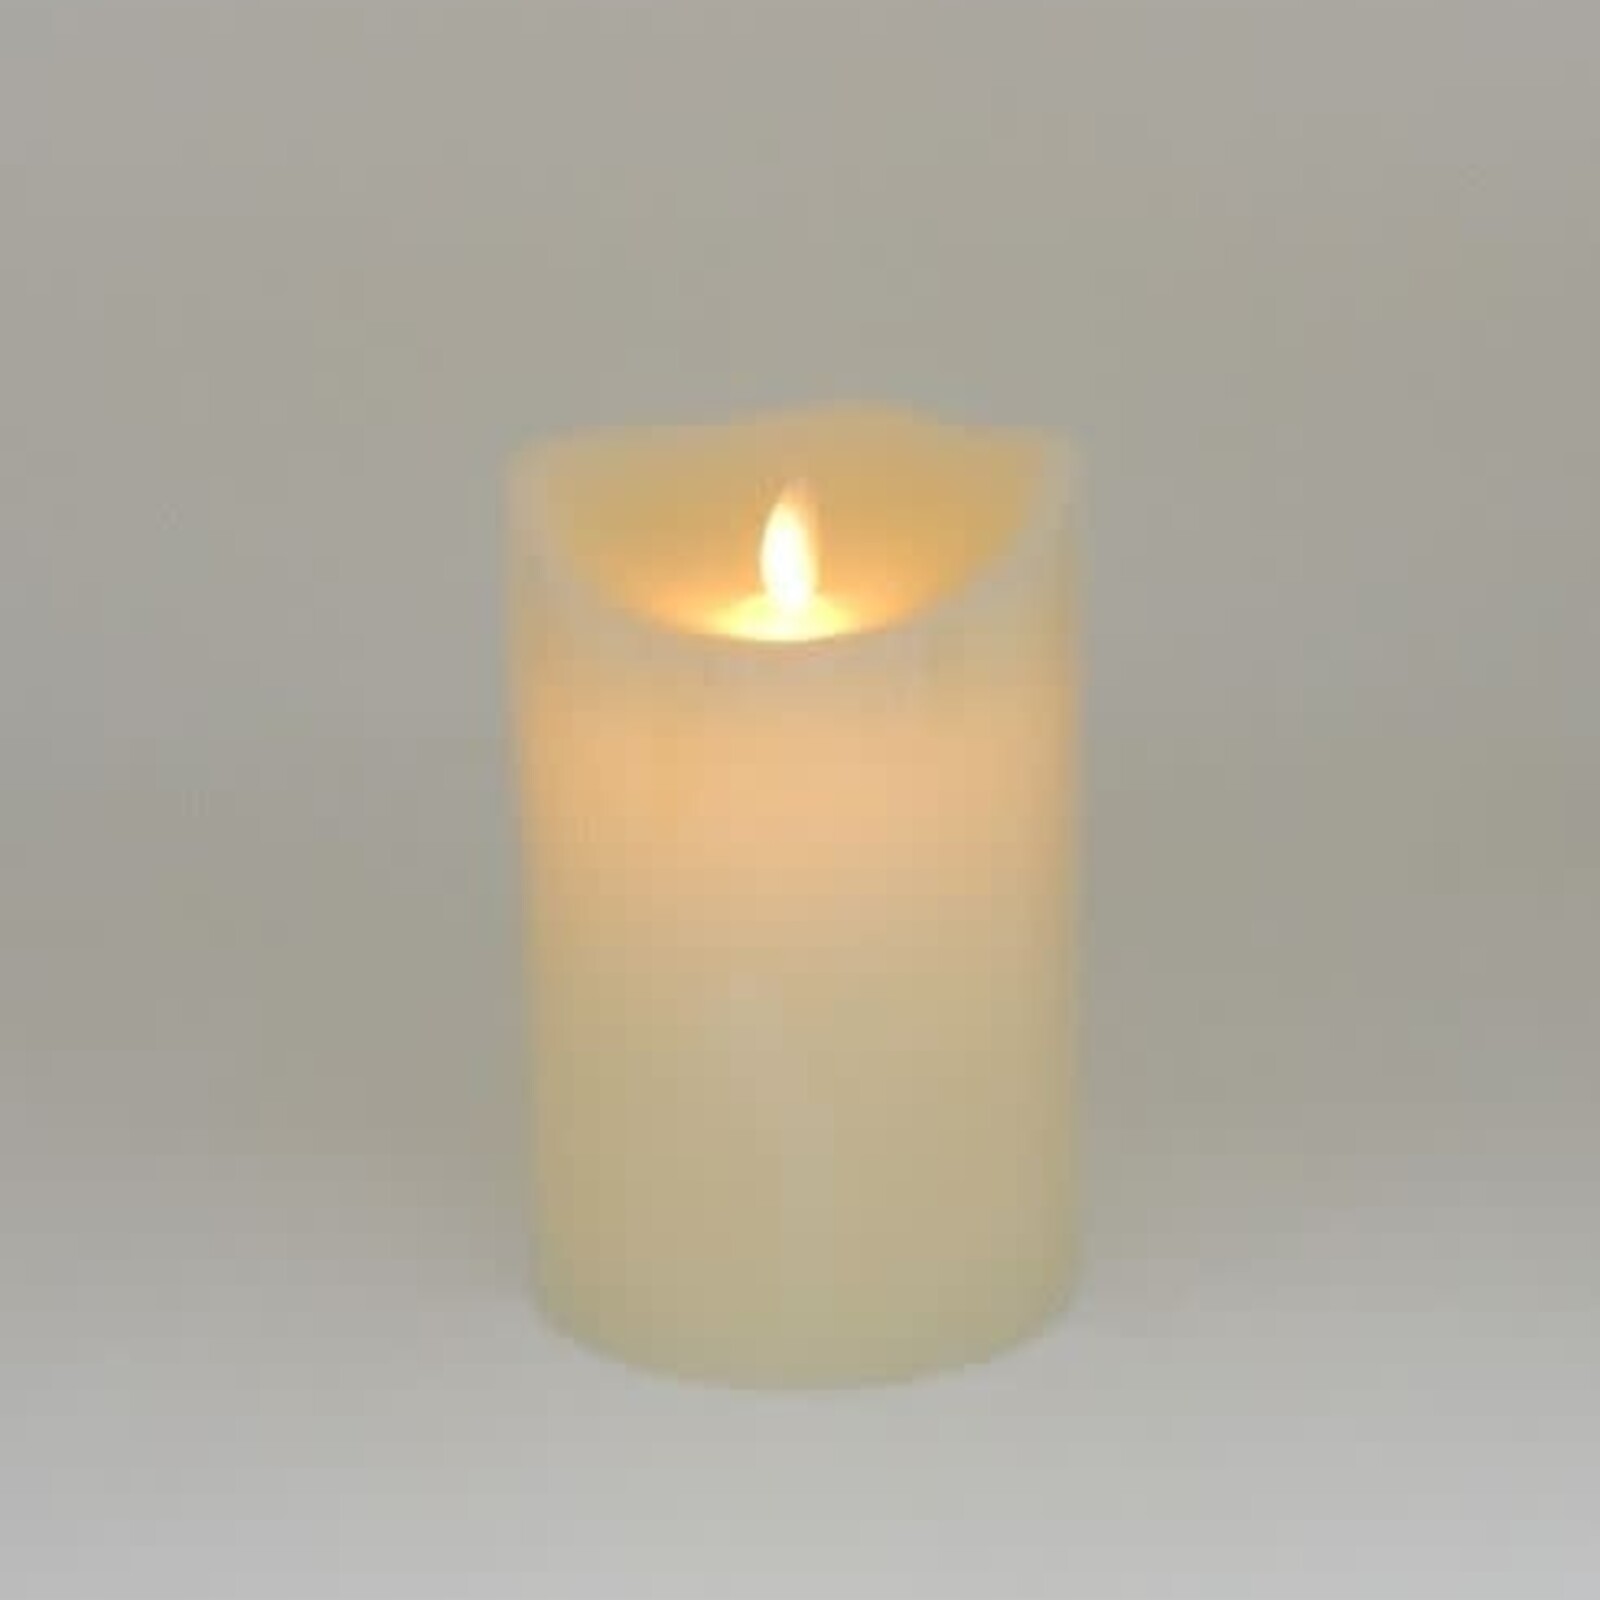 Green Pasture 4" X 6" LED Flickering  candle Cream, 6 hours timer  LE04W loading=